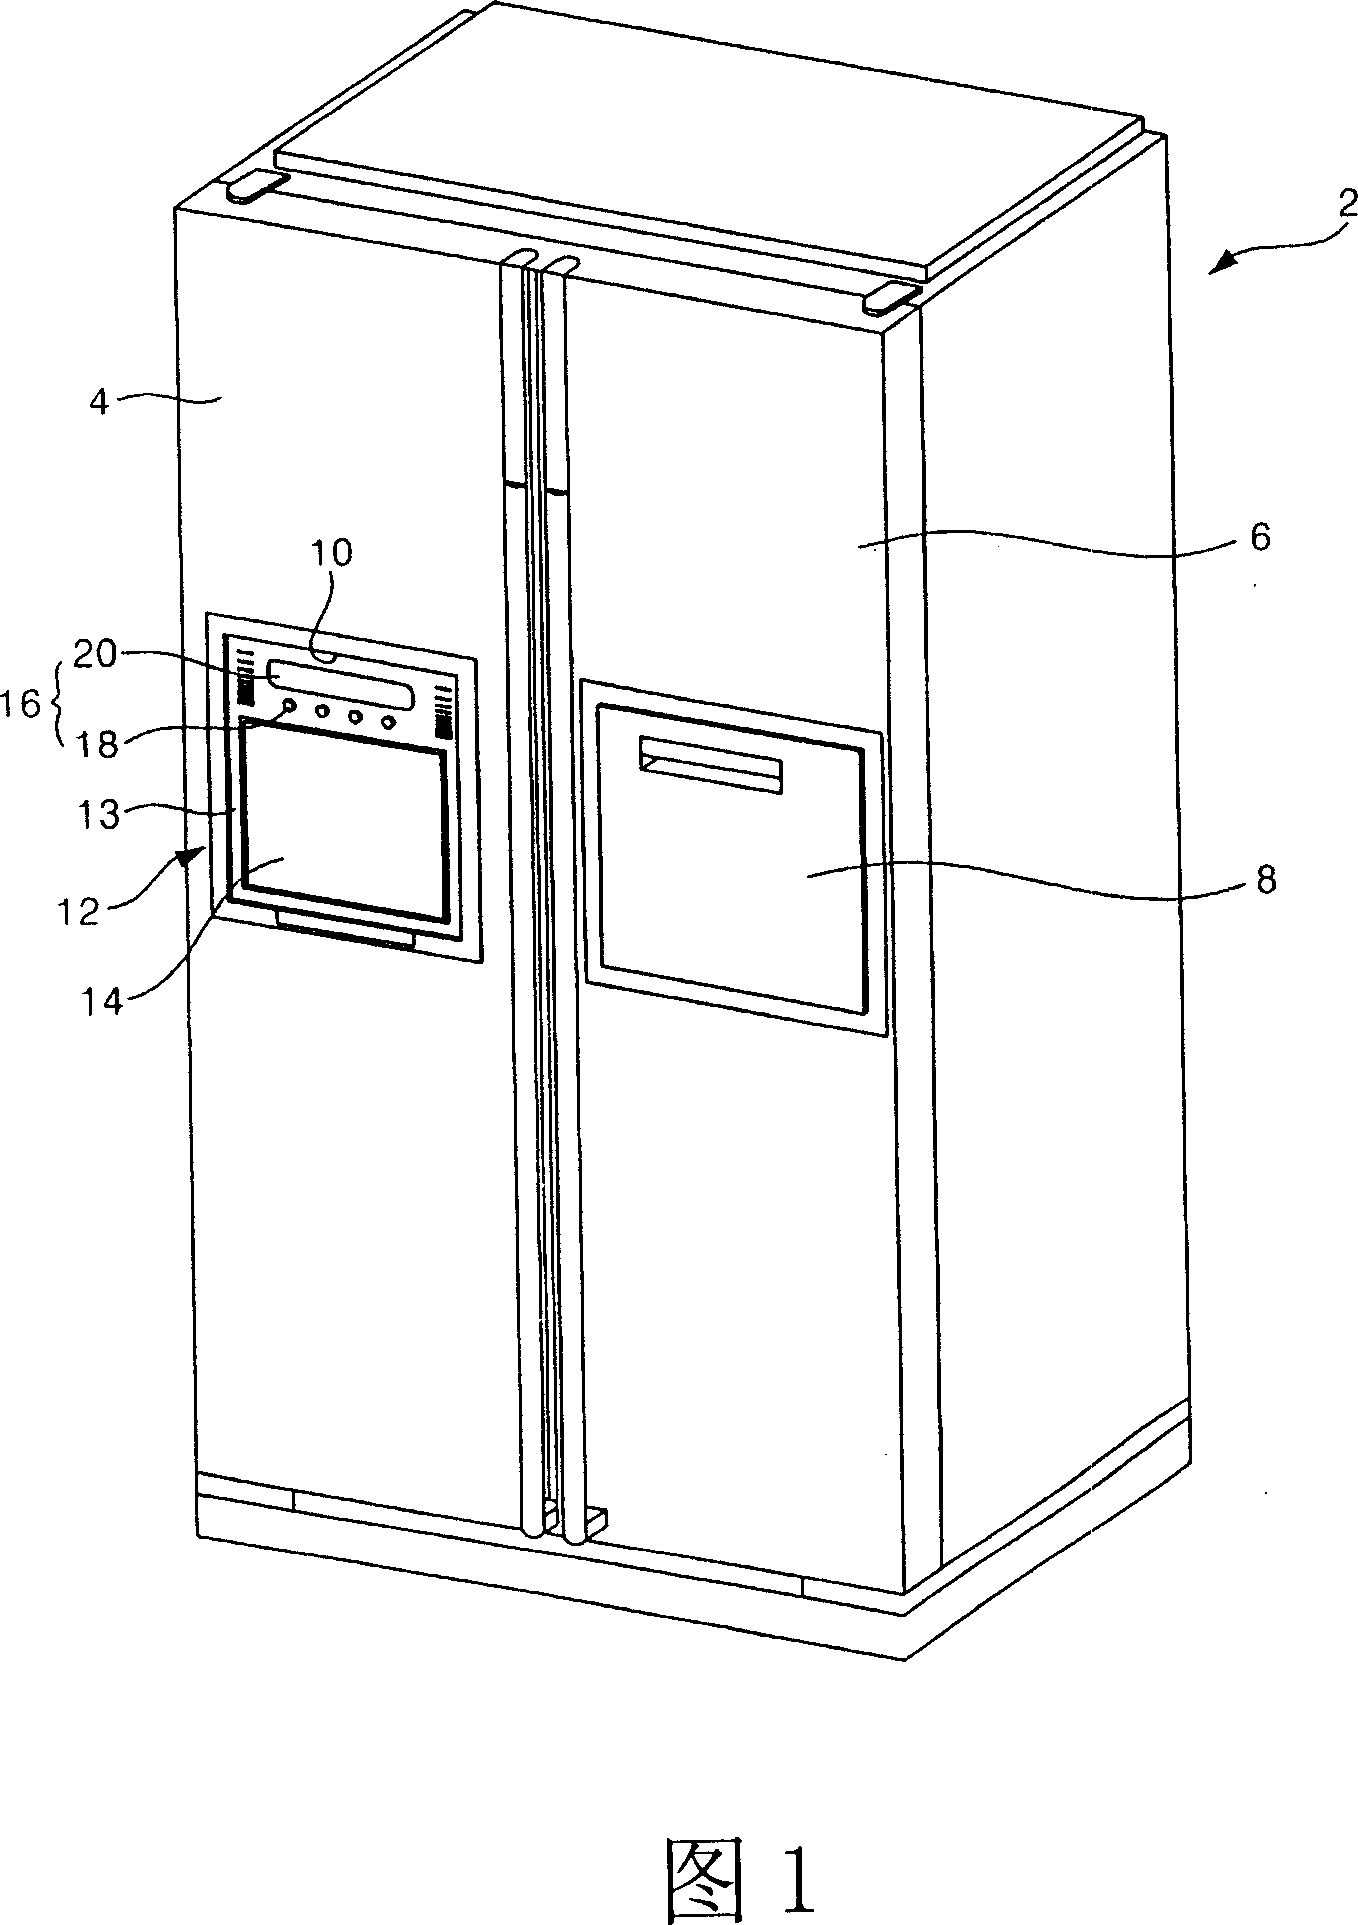 Display apparatus protecting structure of refrigerator